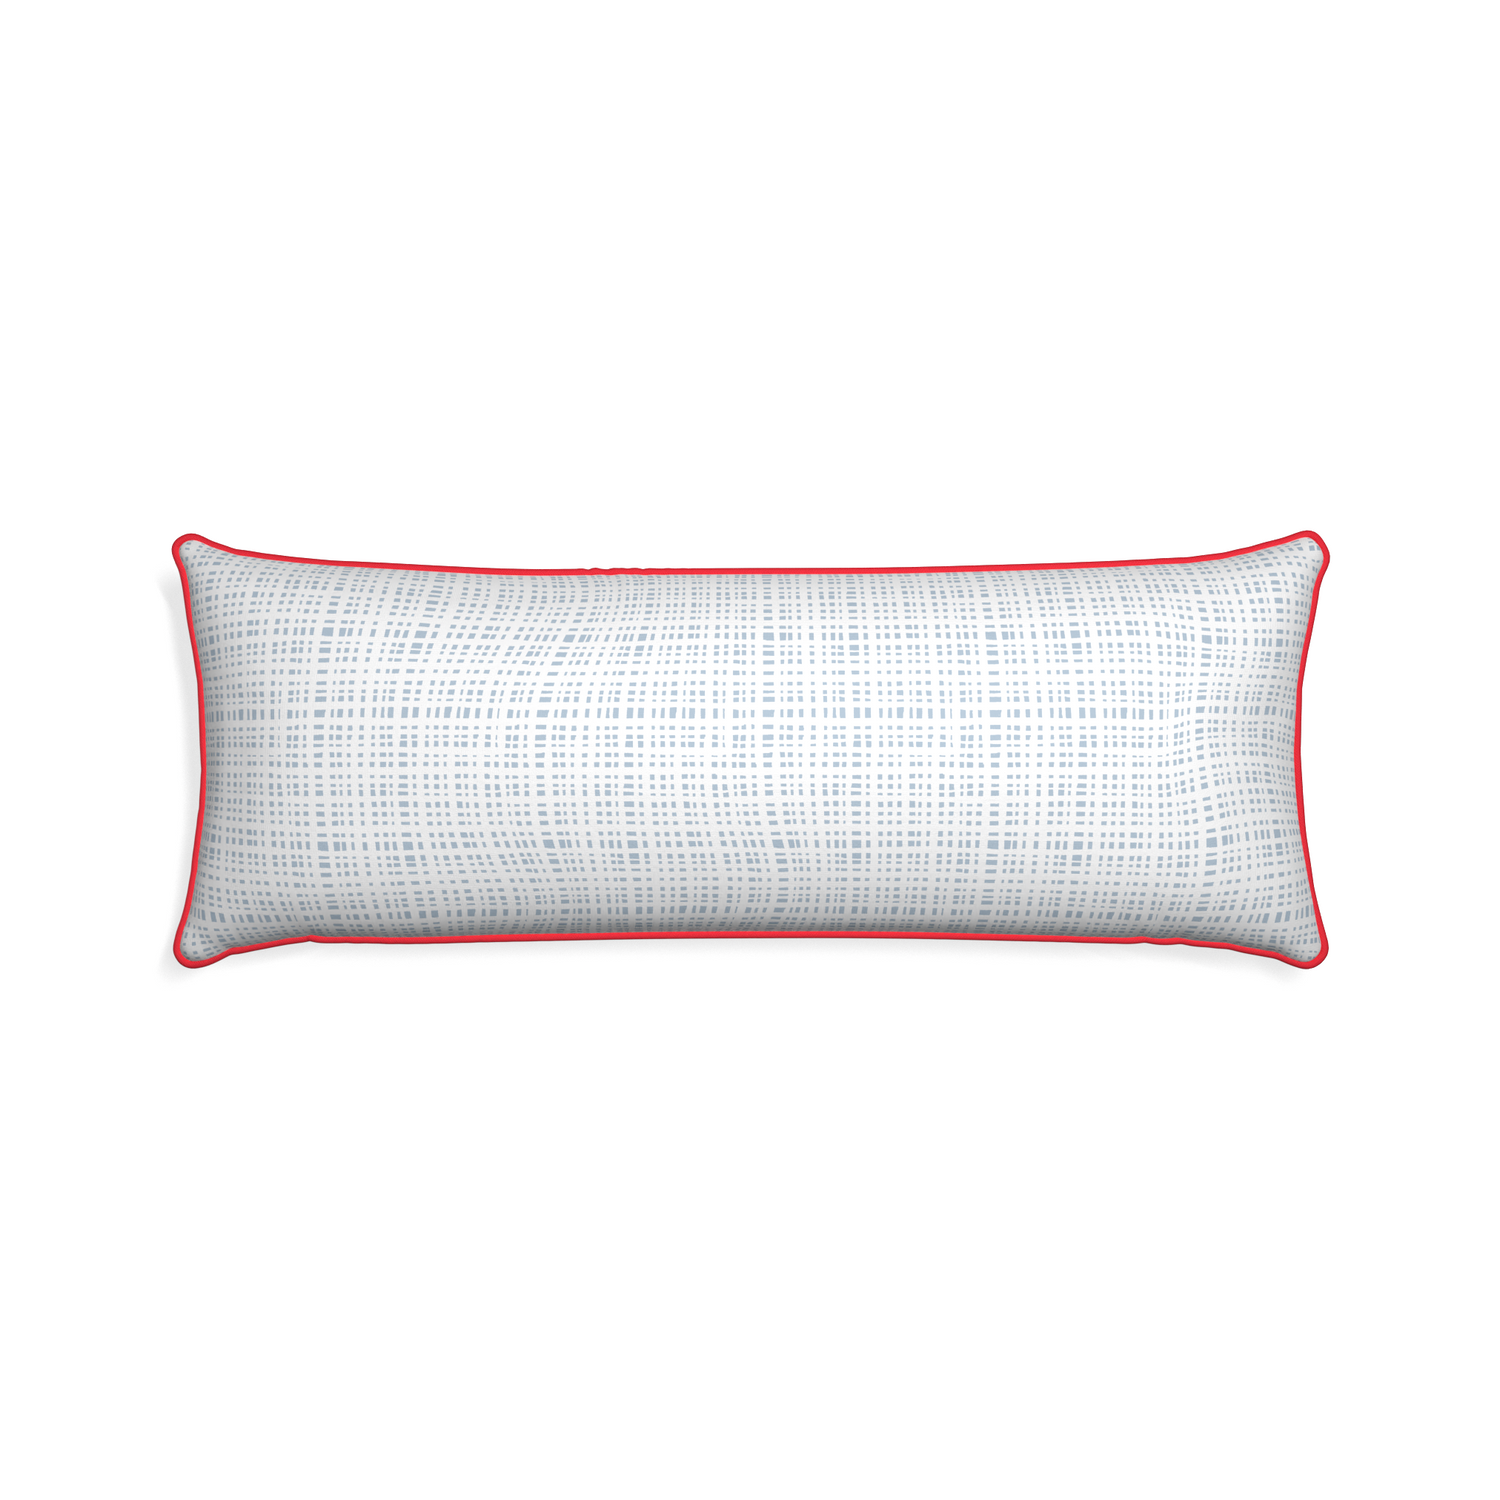 Xl-lumbar ginger sky custom pillow with cherry piping on white background